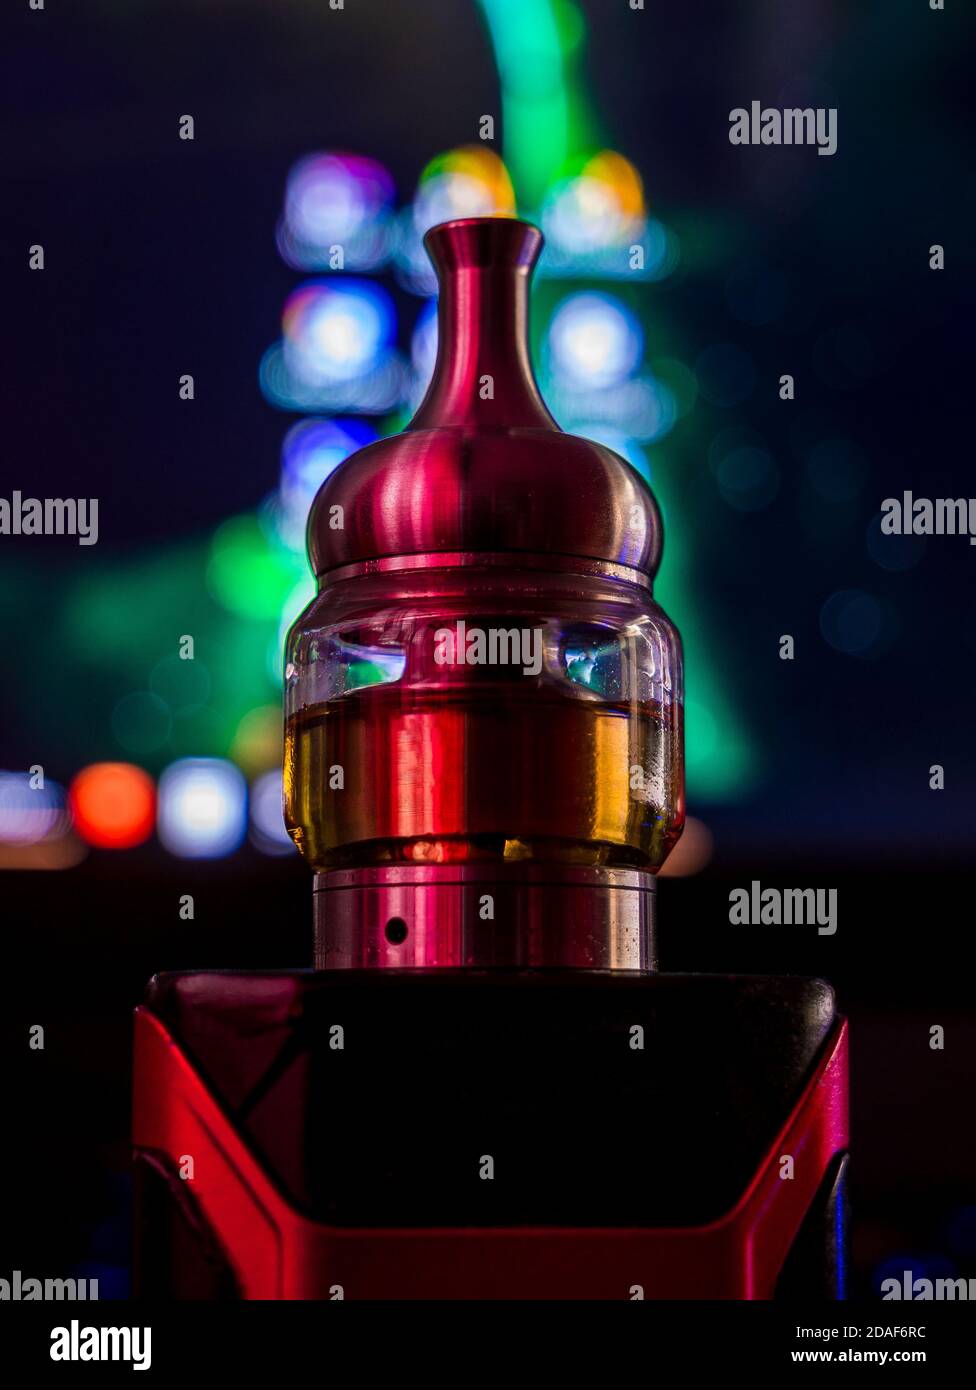 Filled electronic cigarette atomizer for vaping on top of the electronic mode. Unidentifiable multicolored blurred background. Stock Photo